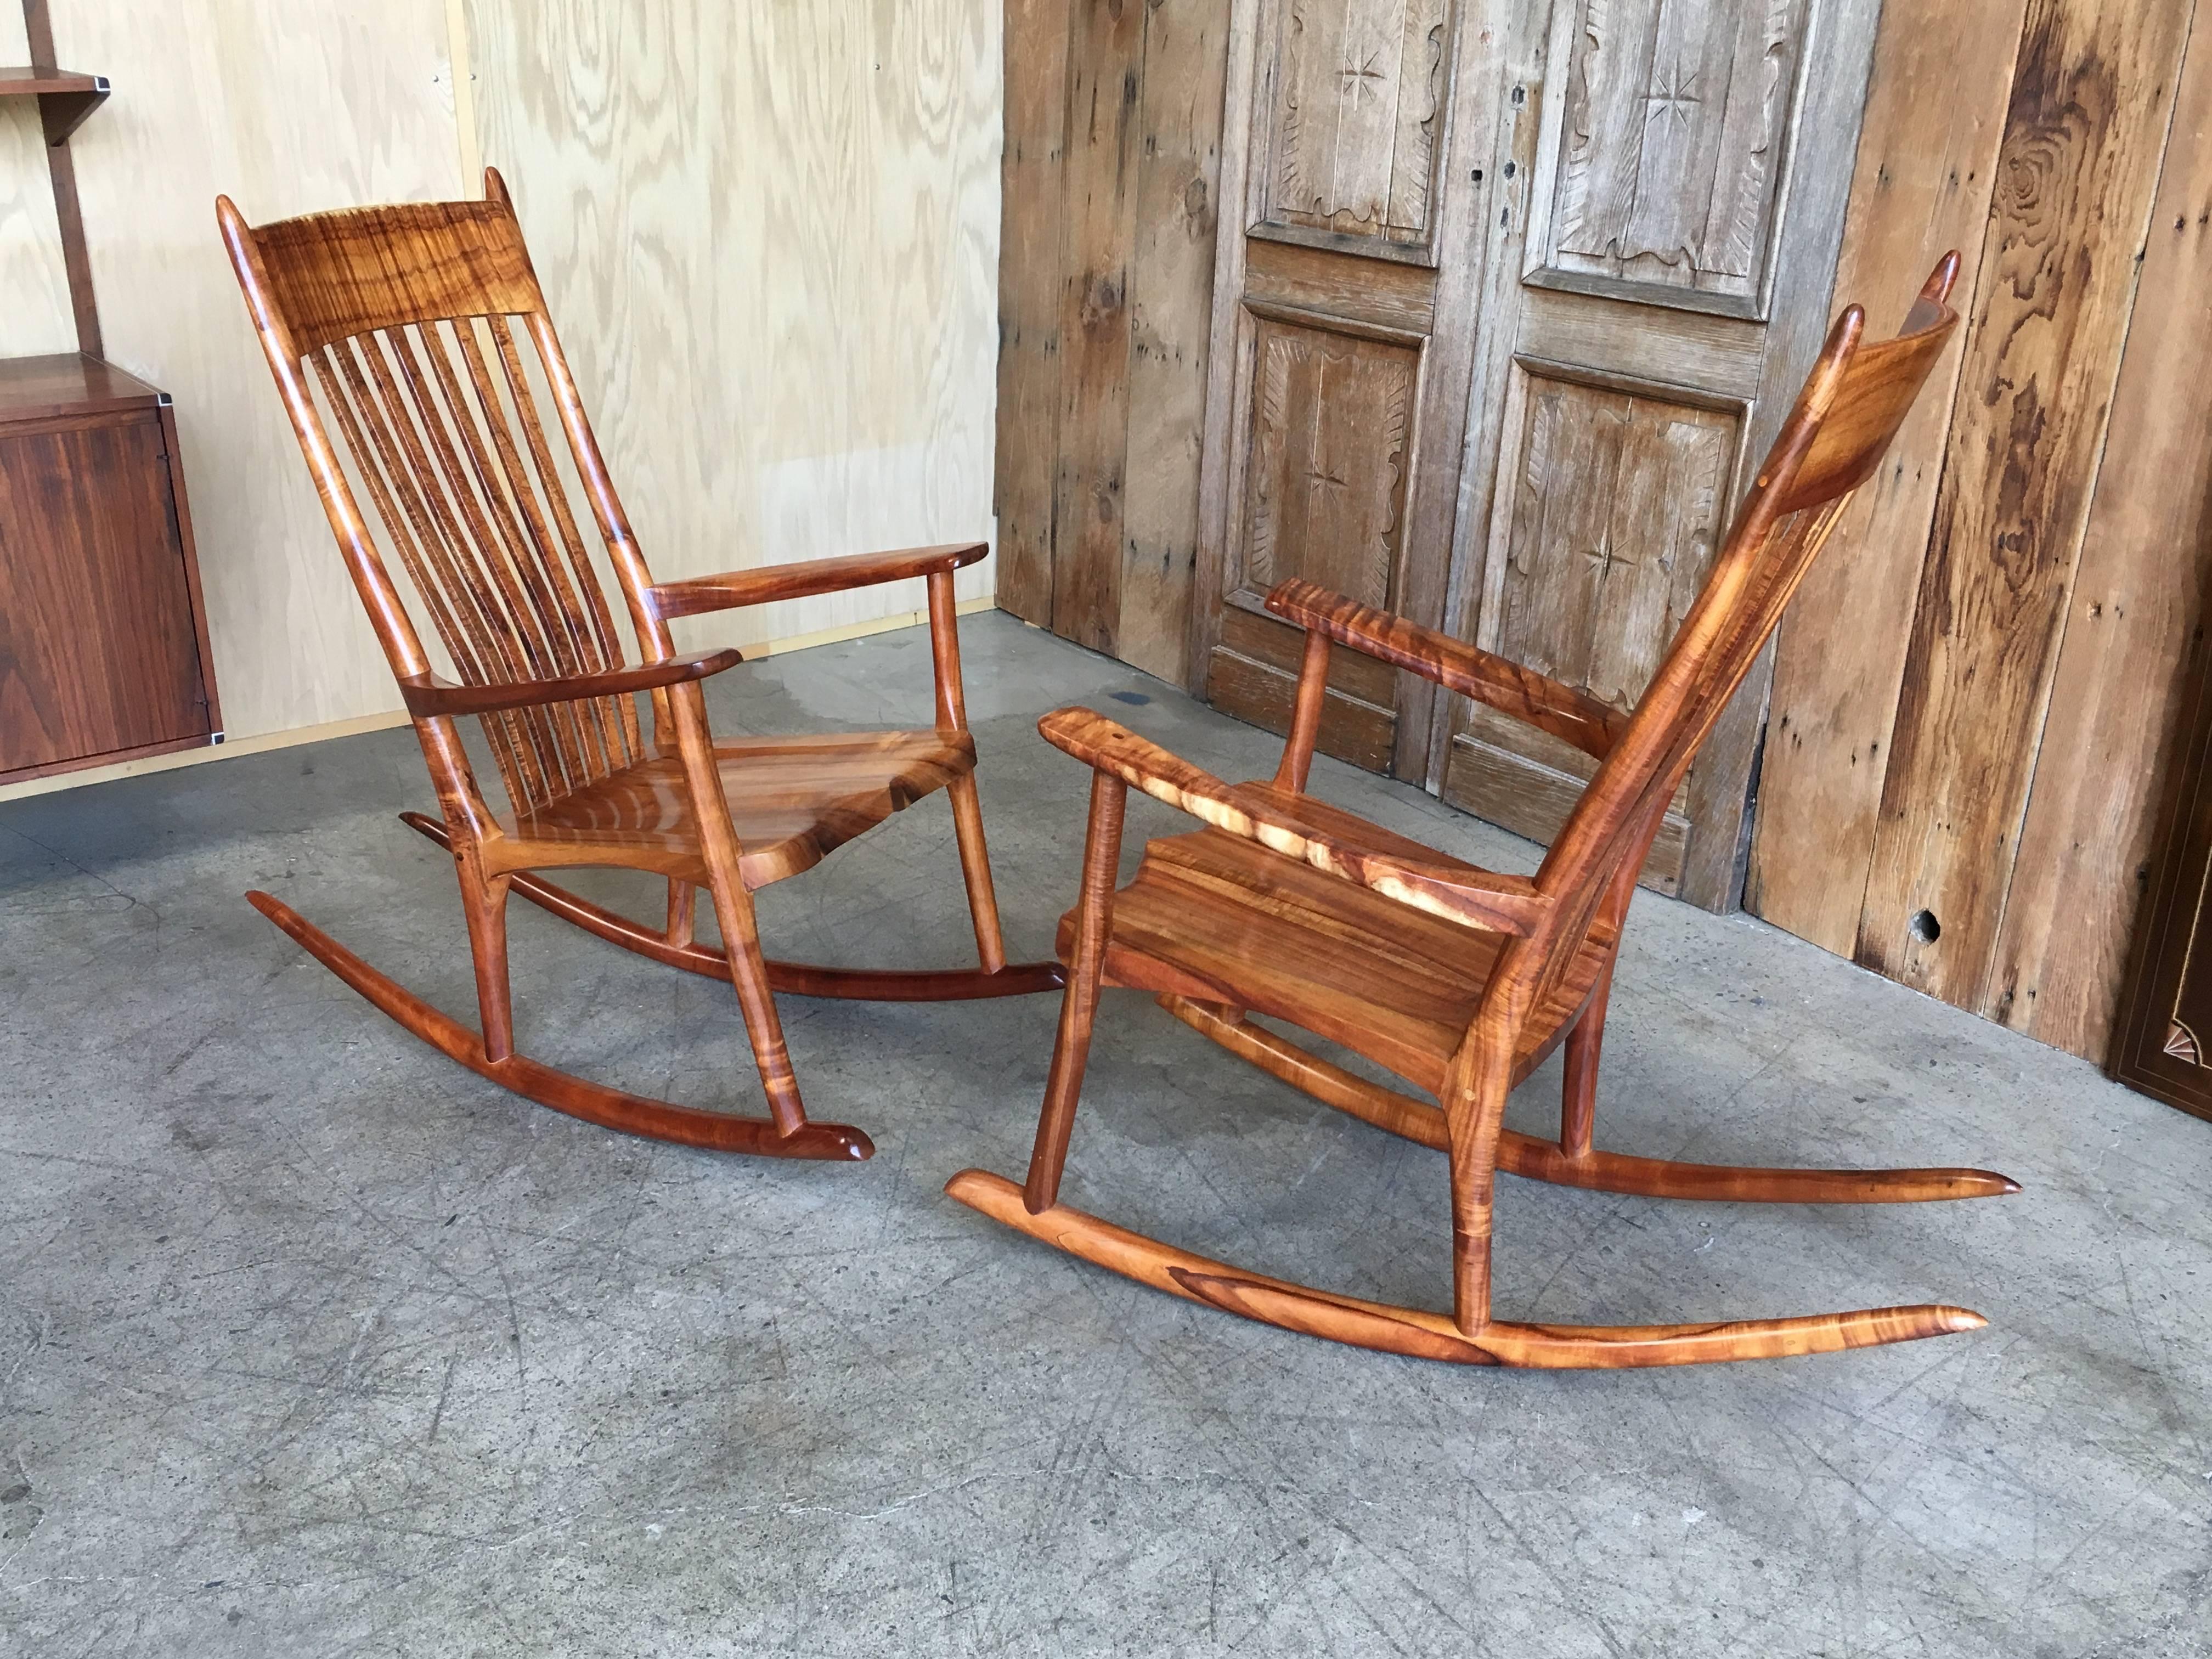 Studio Crafted Koa Wood Rocking Chairs by Stan Gollaher 1